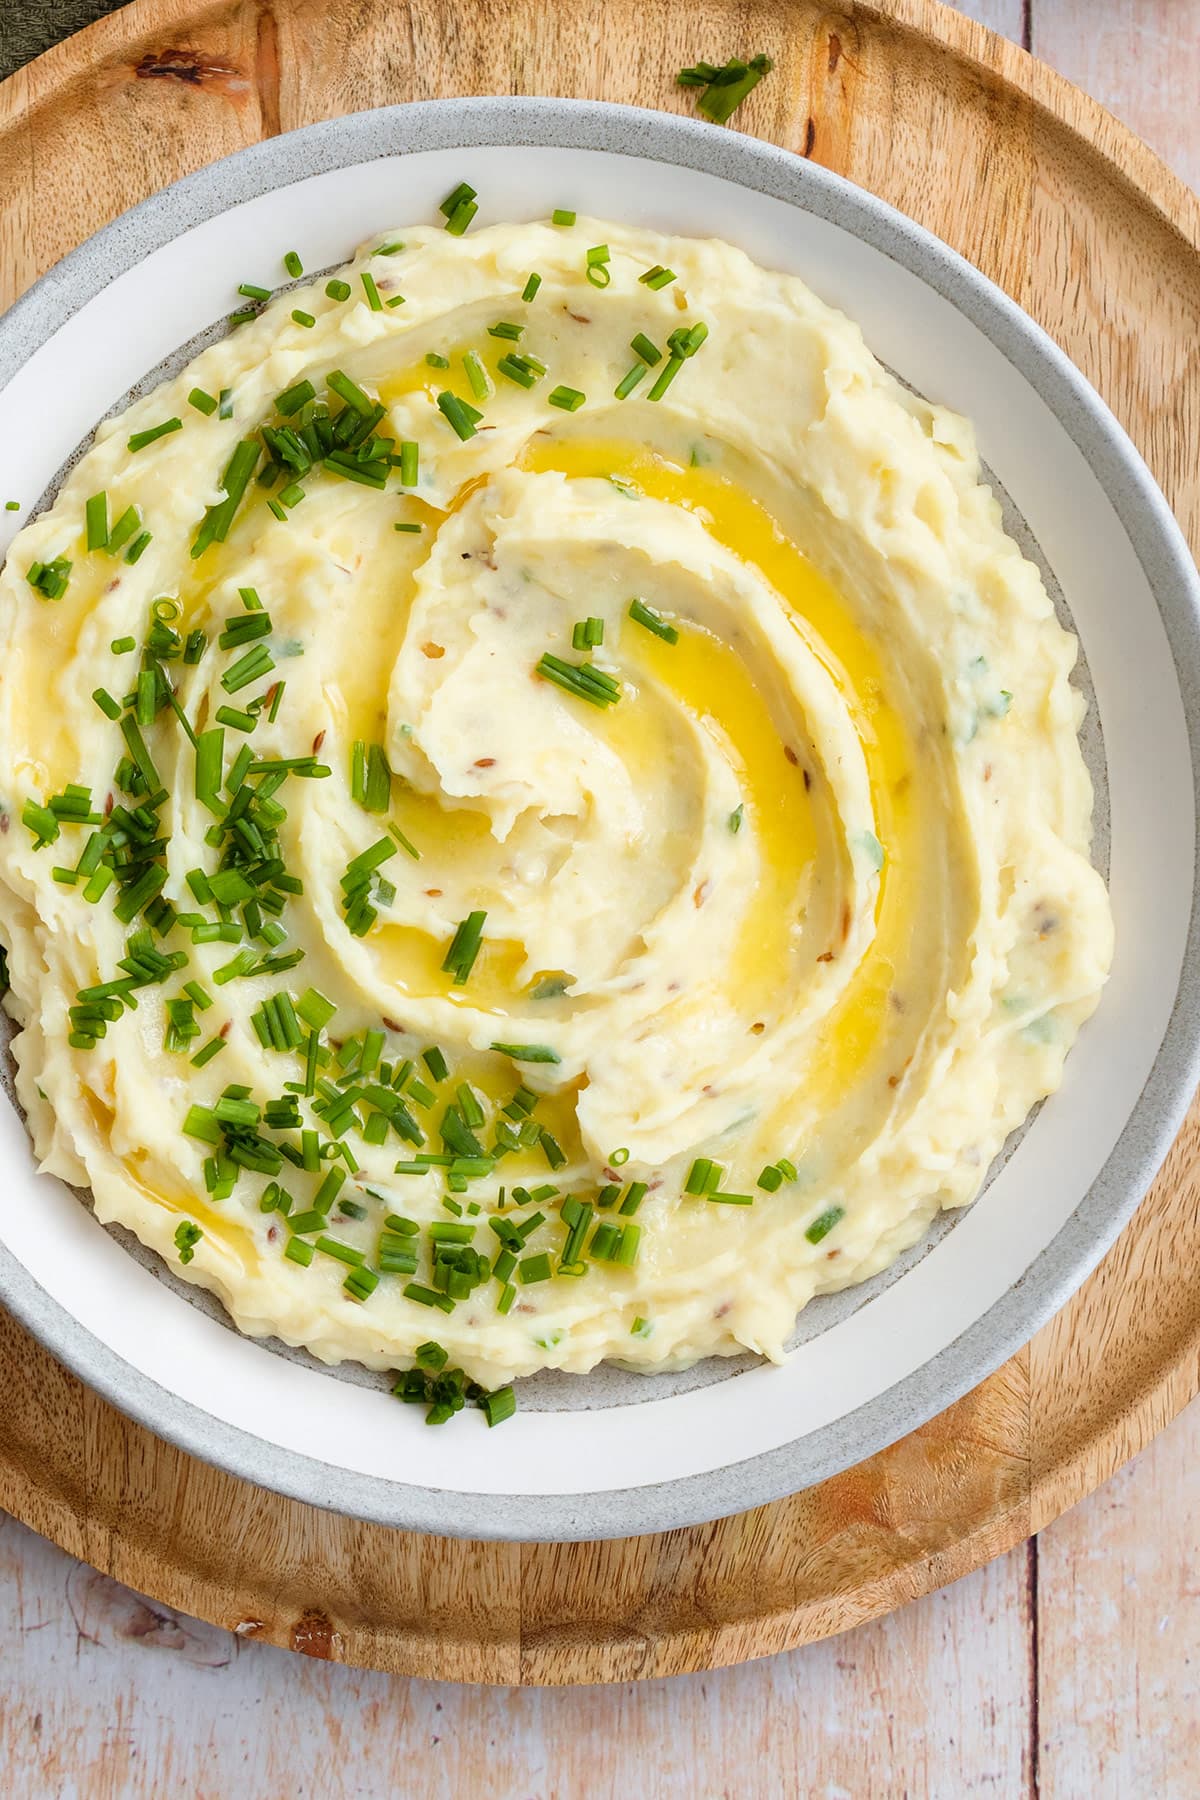 Mashed potatoes topped with fresh chives and butter in a grey shallow bowl.